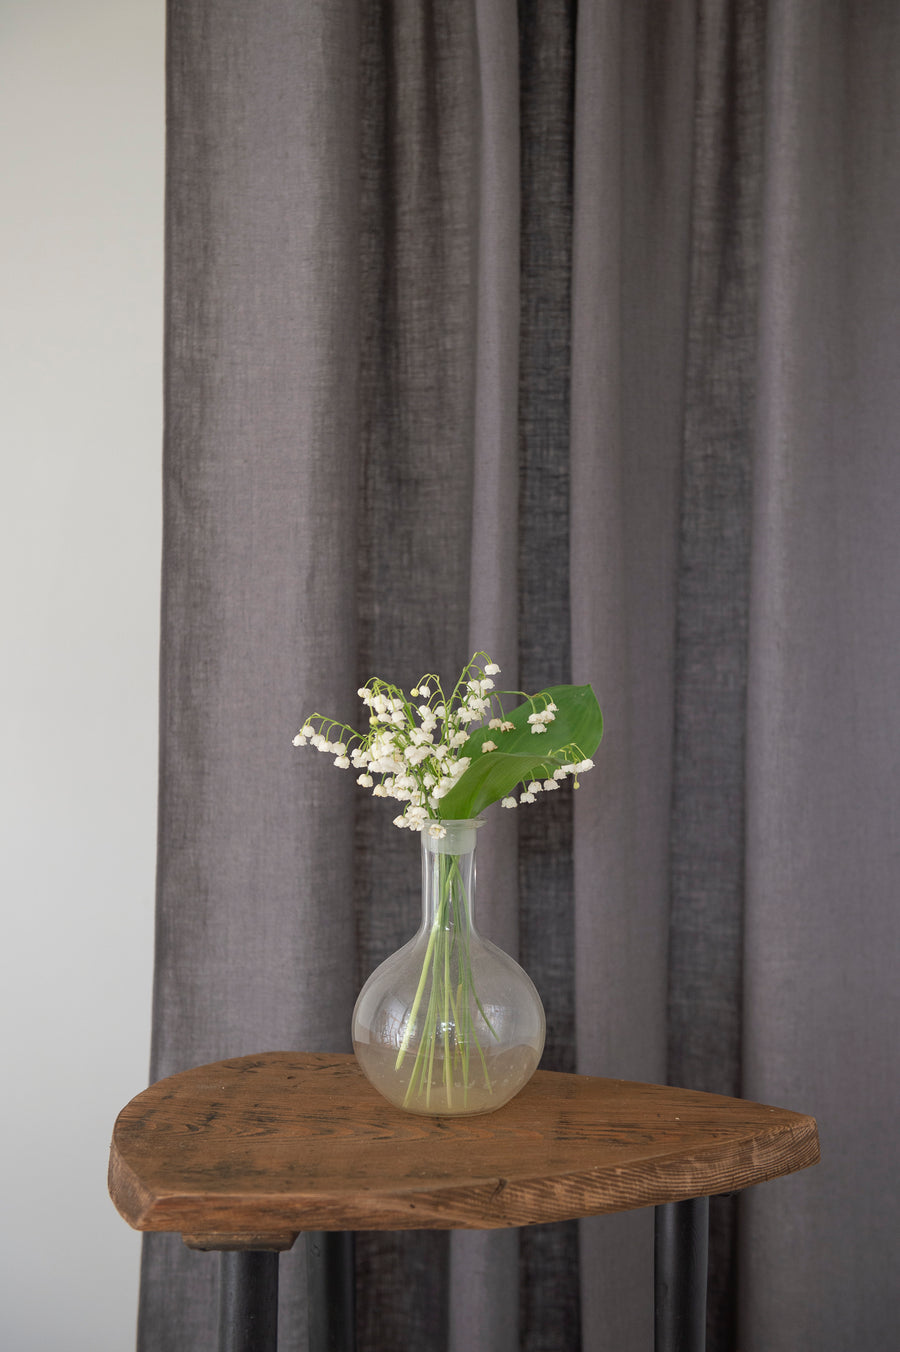 Grey linen curtain with multifunctional heading tape - Linen Couture Boutique